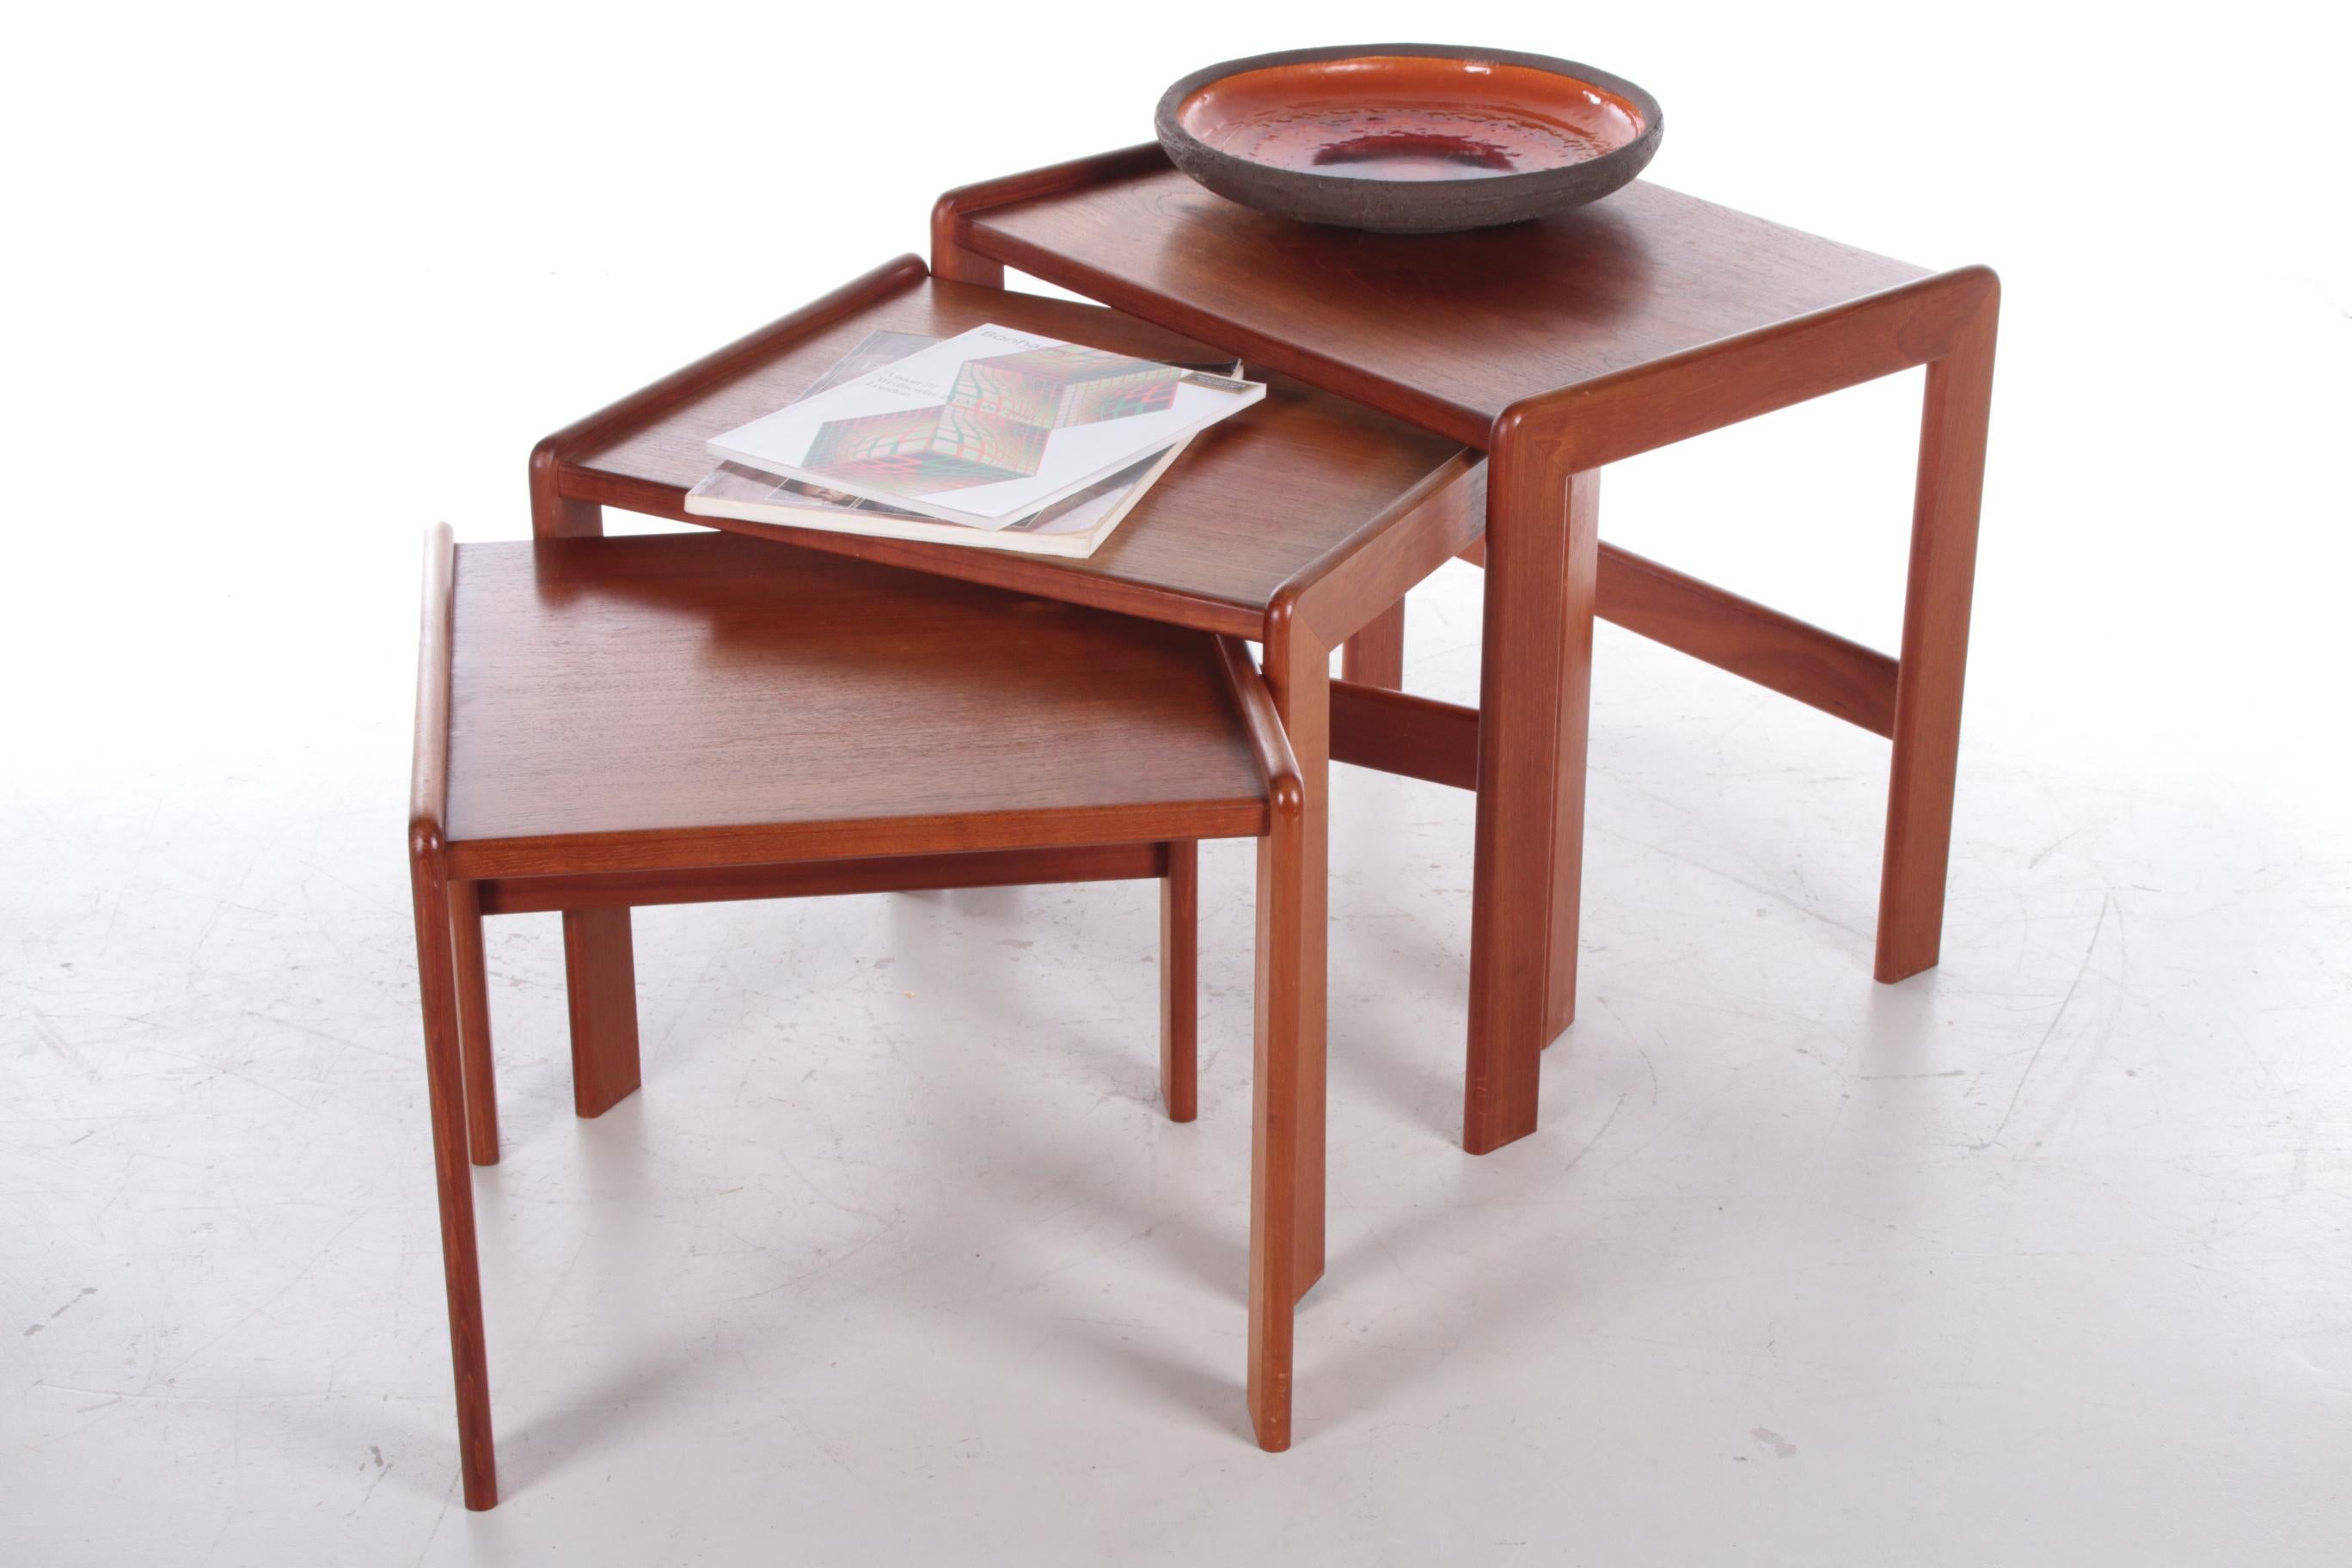 Vintage set of side tables made of teak made in the 1960s


A nice set of 3 side tables.

Made in Scandinavia in the 1960s.

The wood is teak wood on the largest table is a circle.

You could sand and oil the tables and they will look like